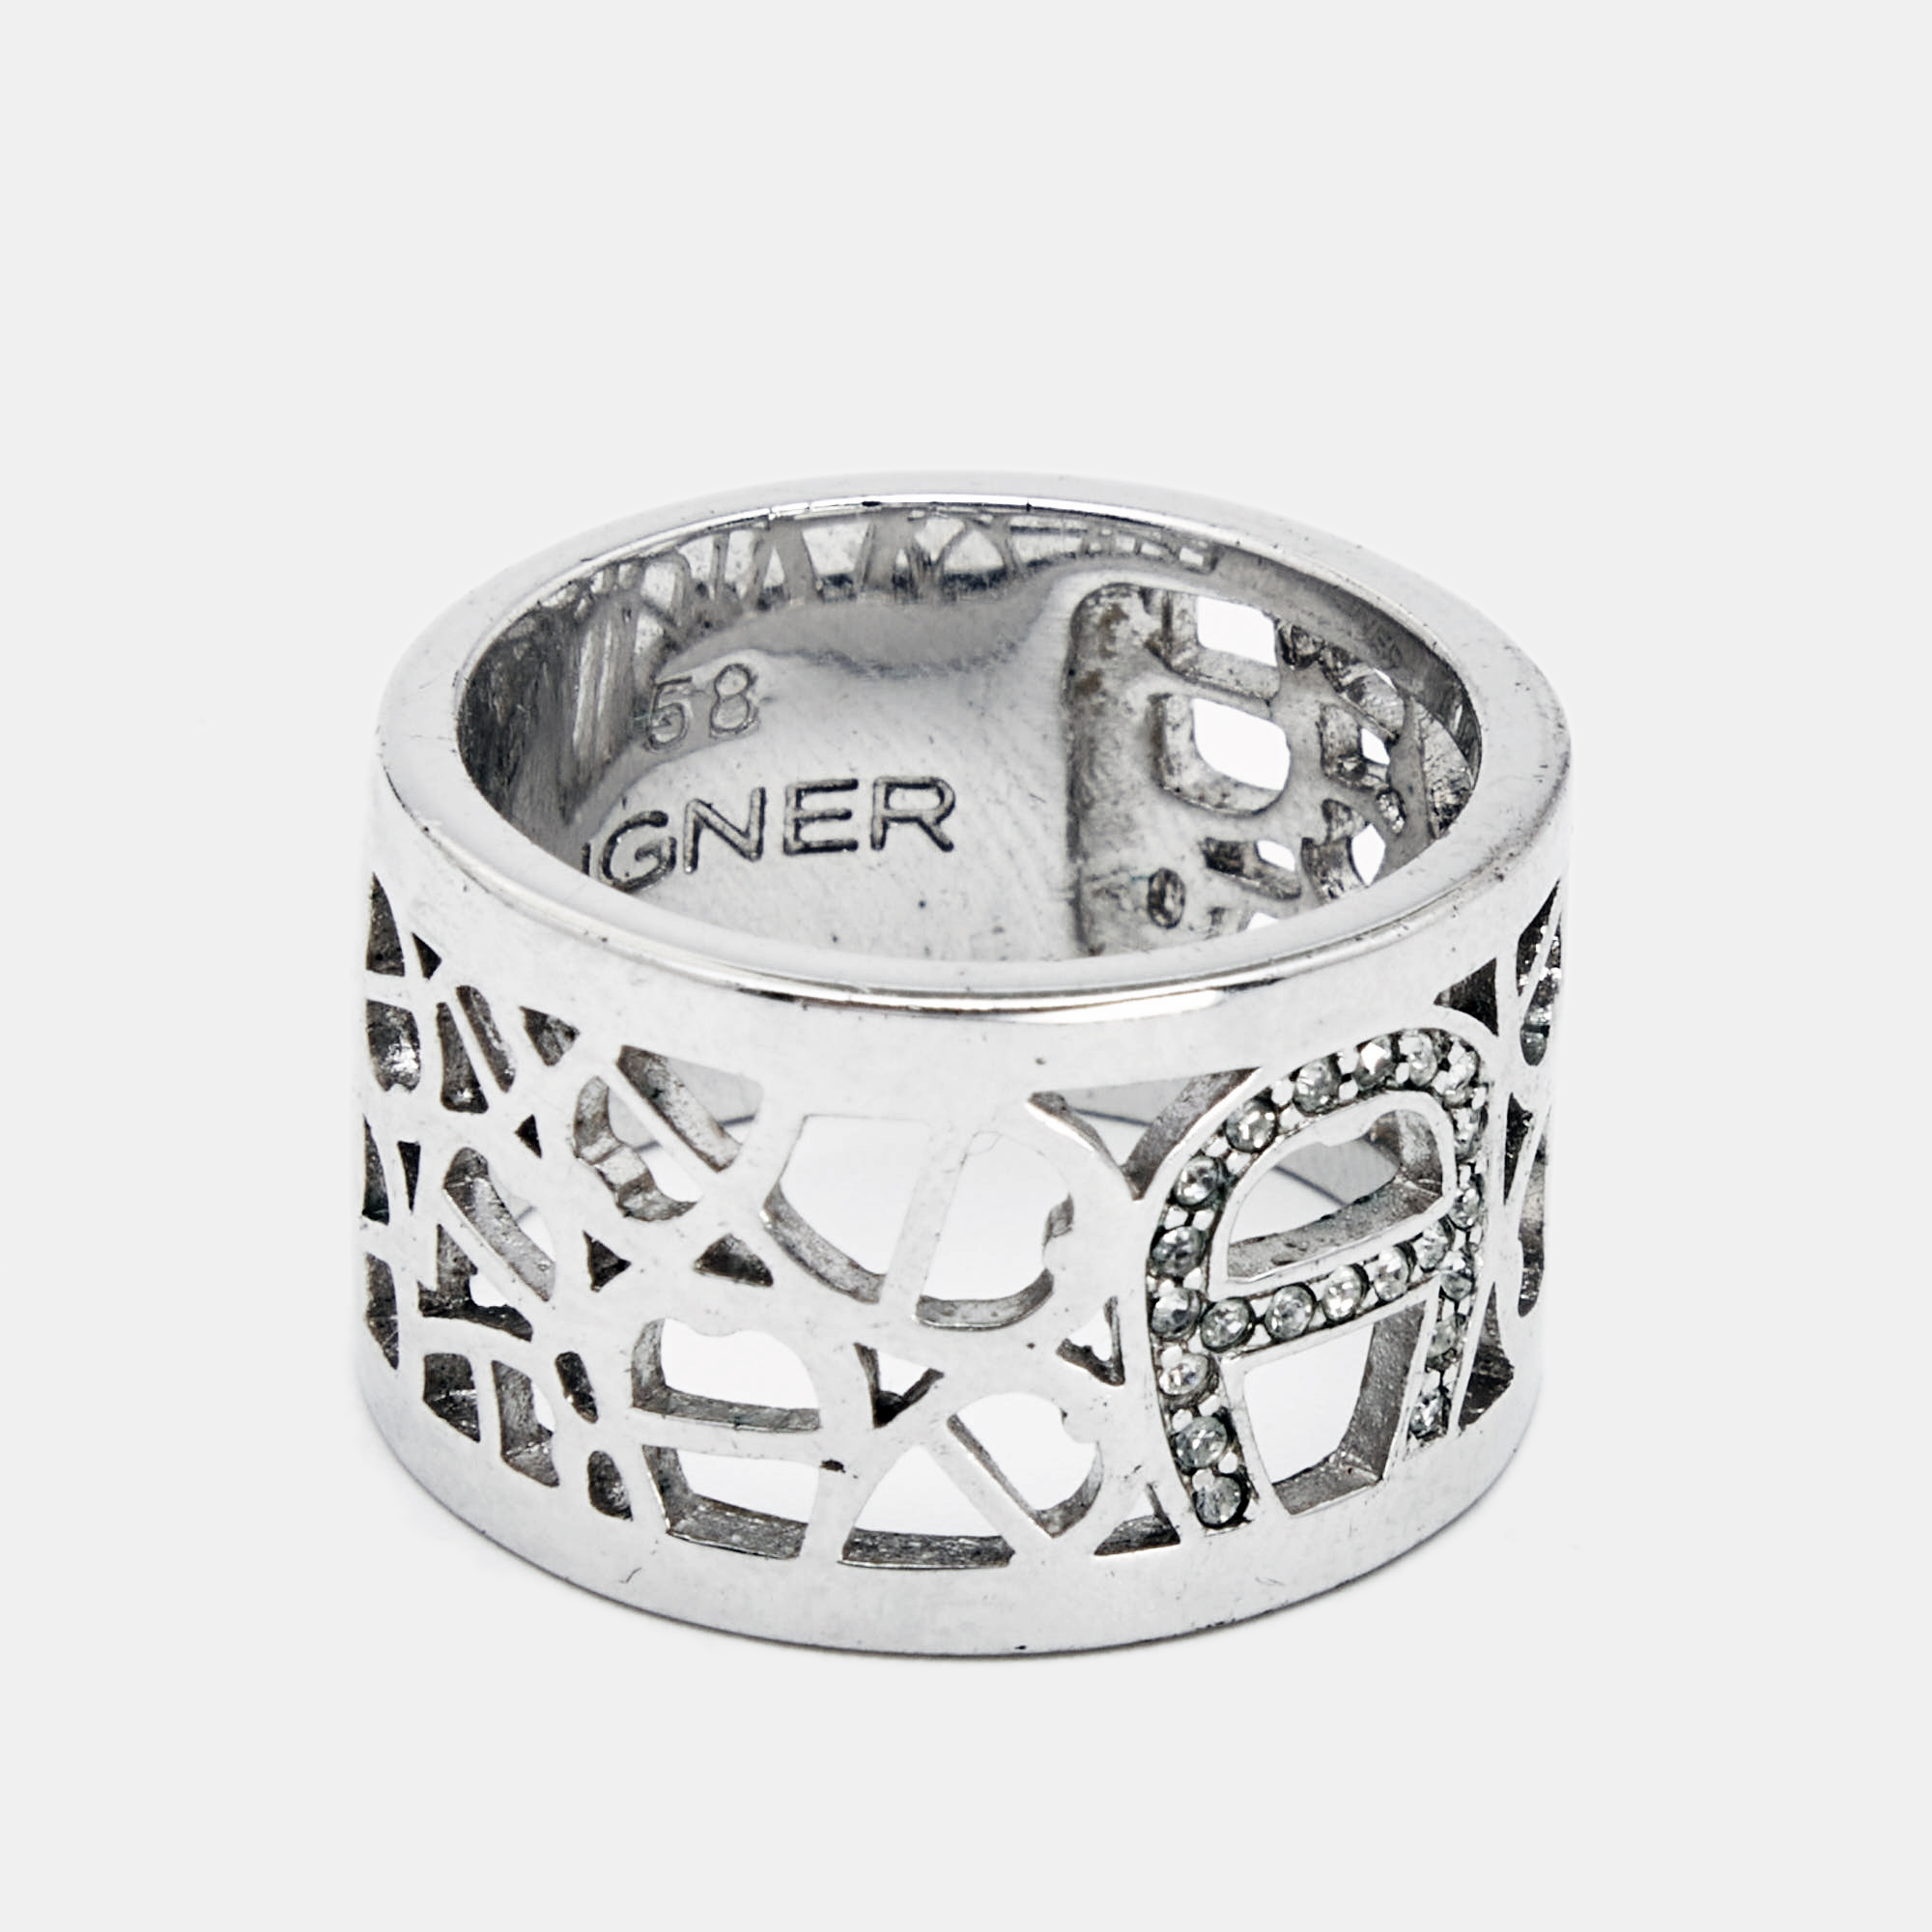 Aigner Crystals SIlver Tone Ring Size 58